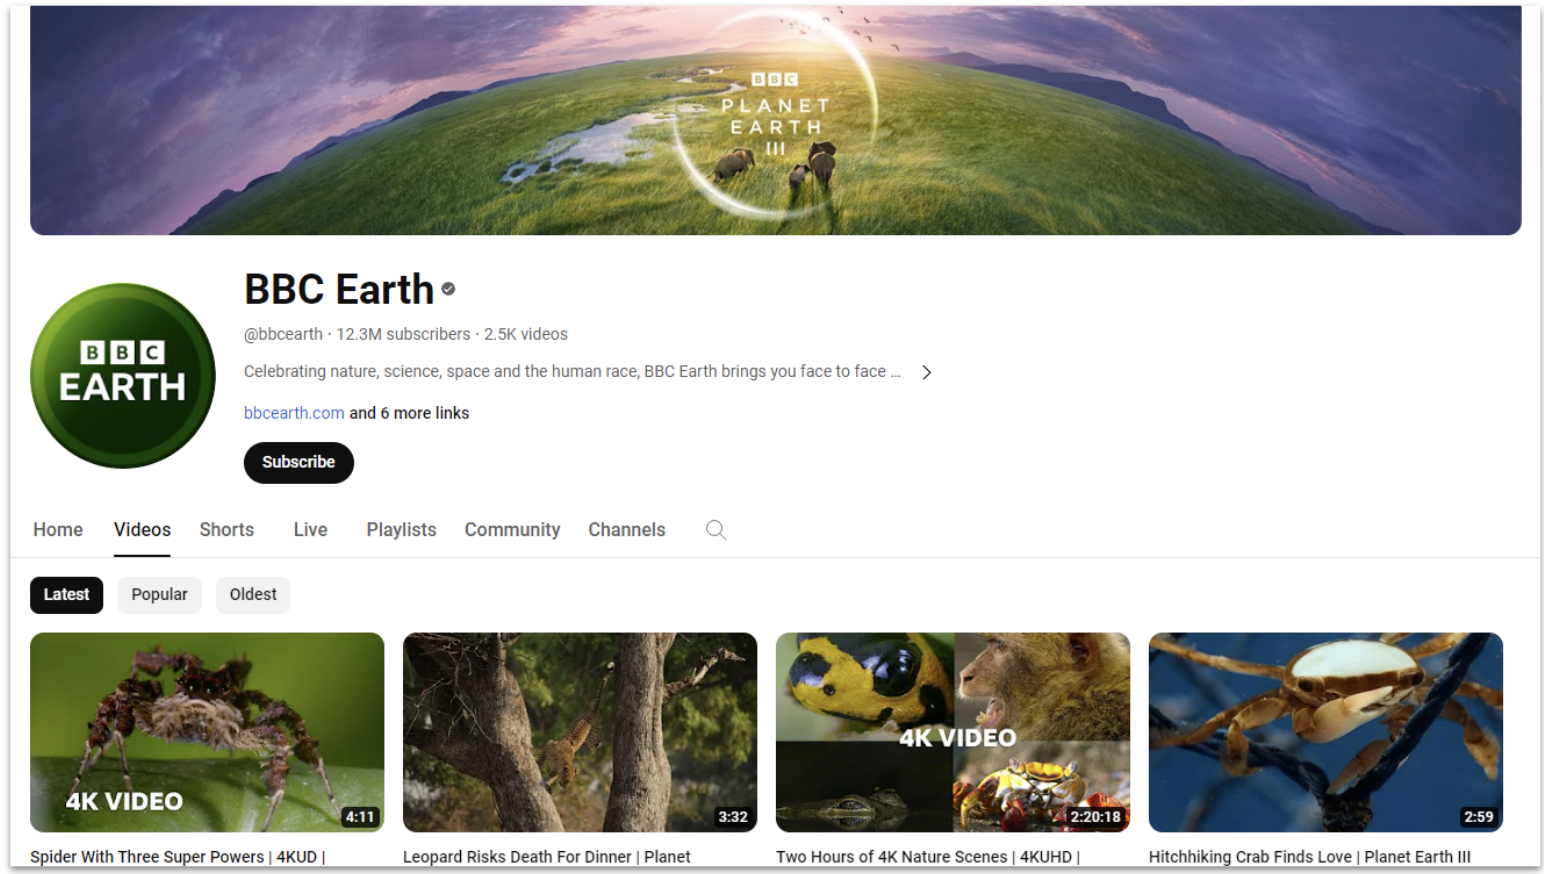 The YouTube page of BBC Earth, showcasing their banner